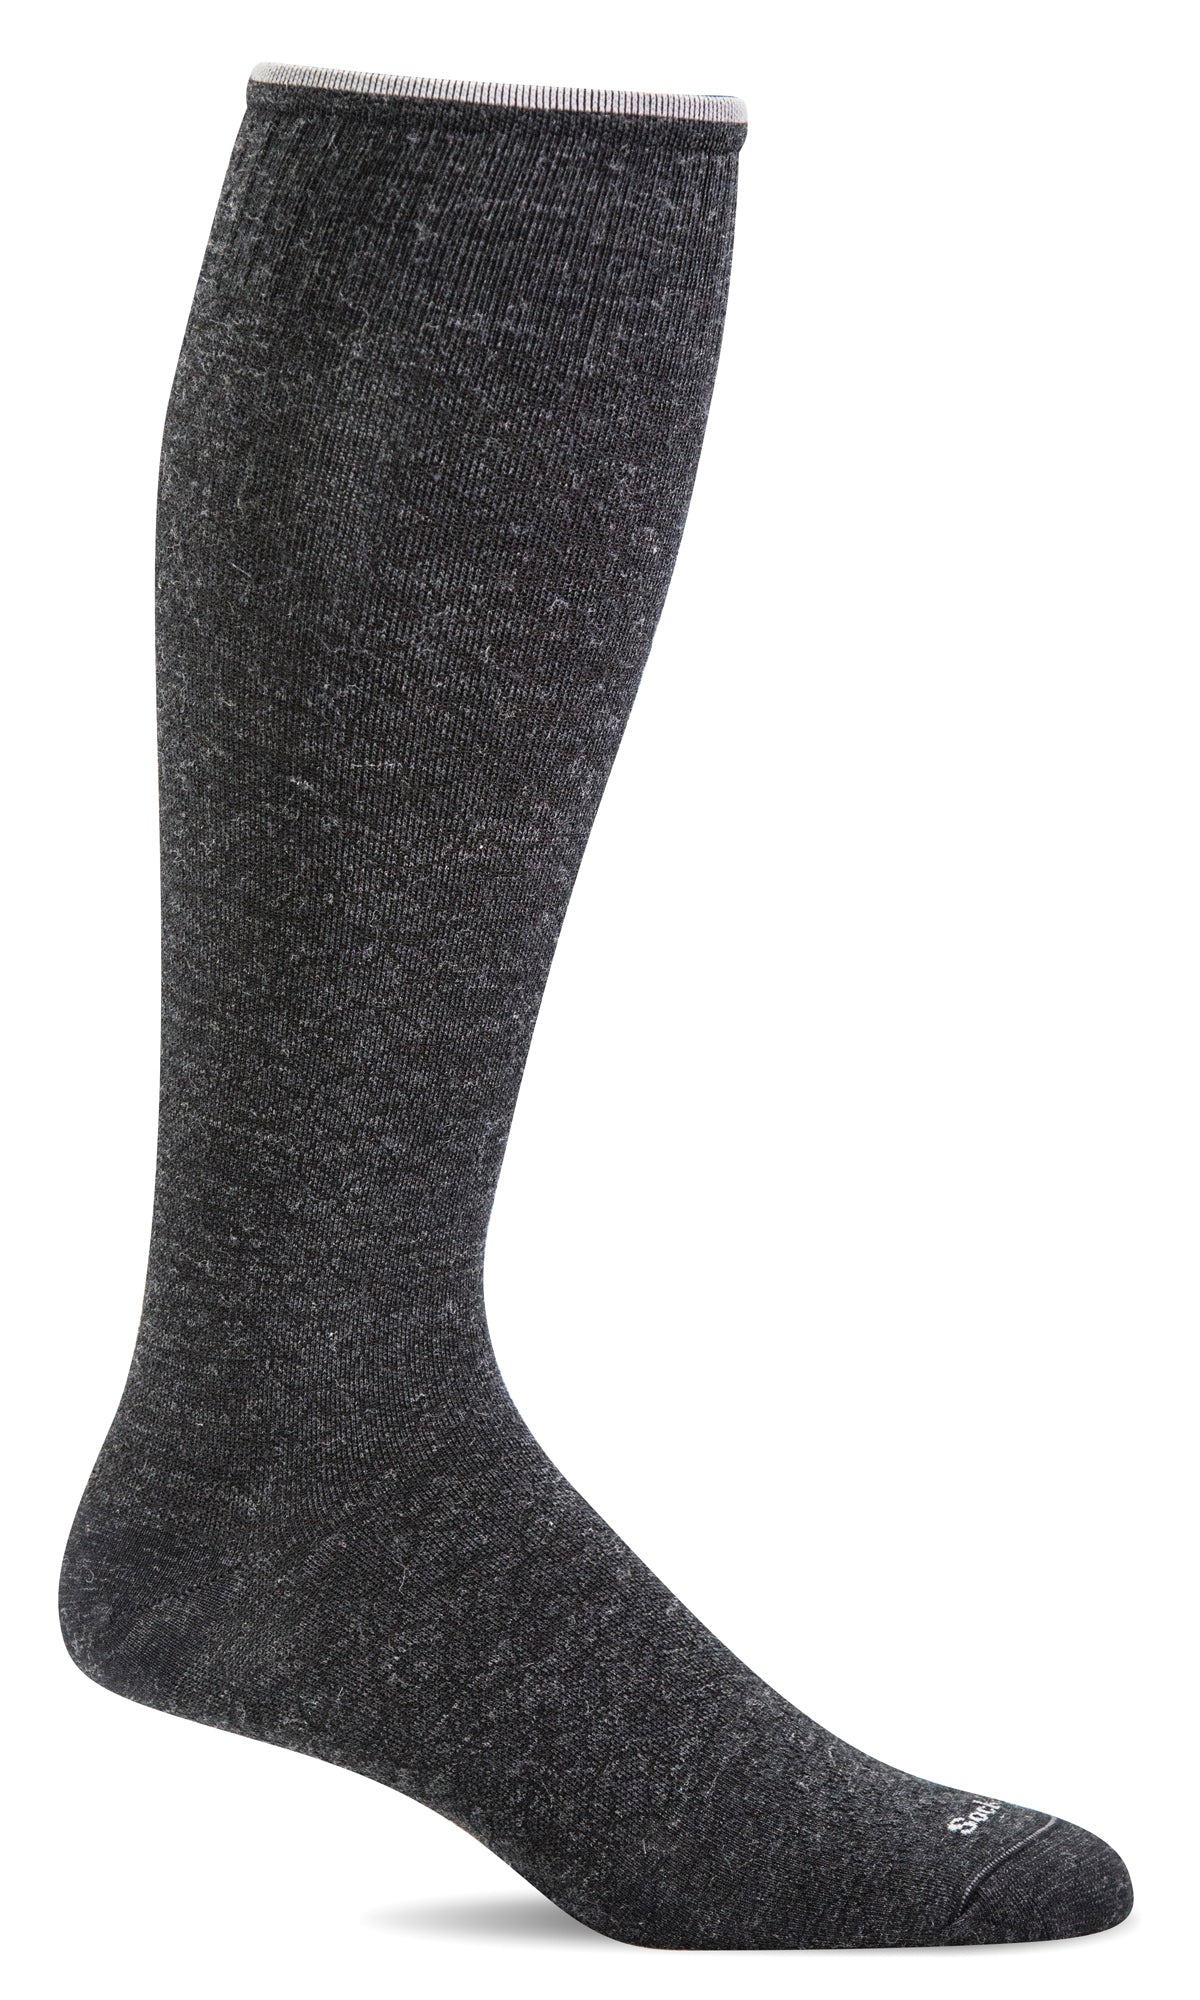 Featherweight Fancy Women's Bamboo/Merino Moderate Graduated Compression in Black - The Sockery